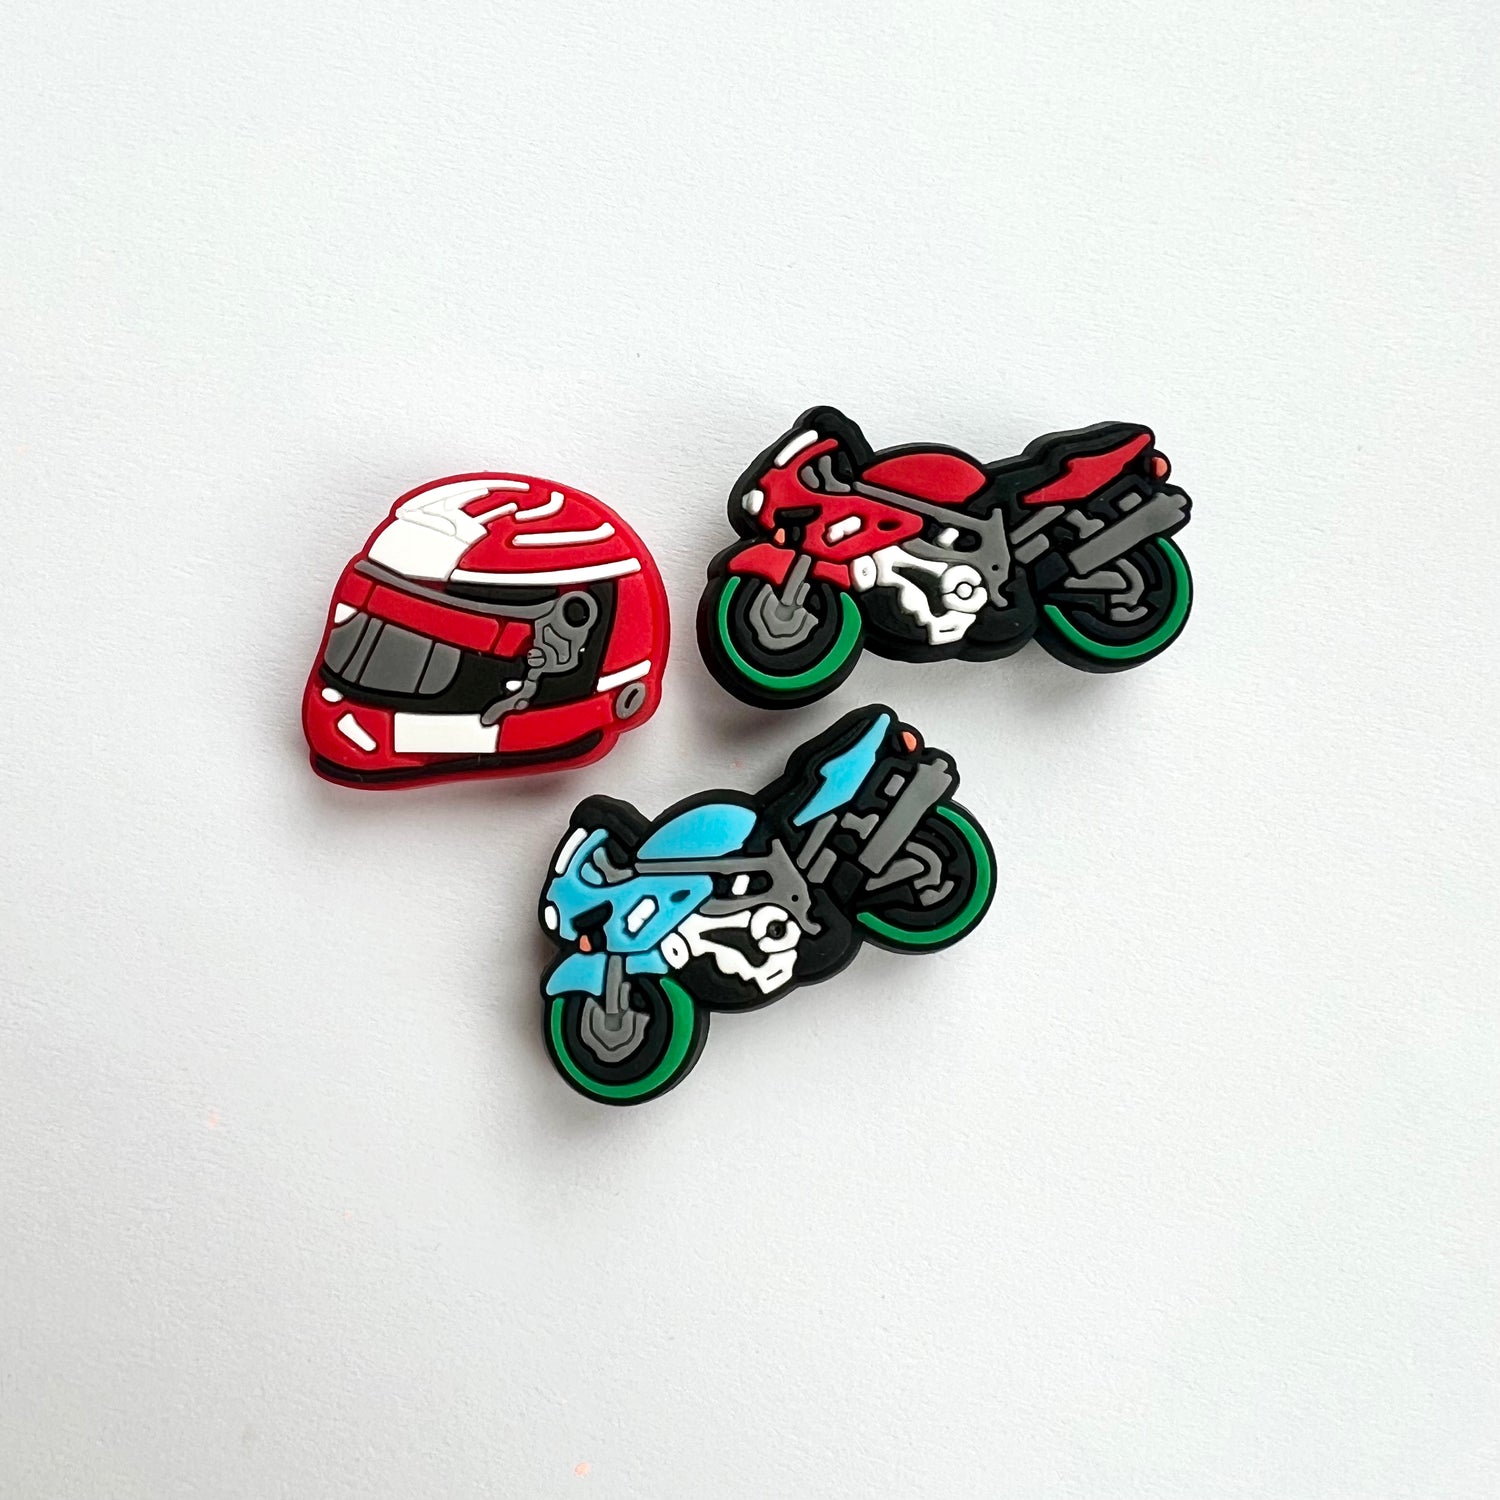 The Motorbike Charms Pack